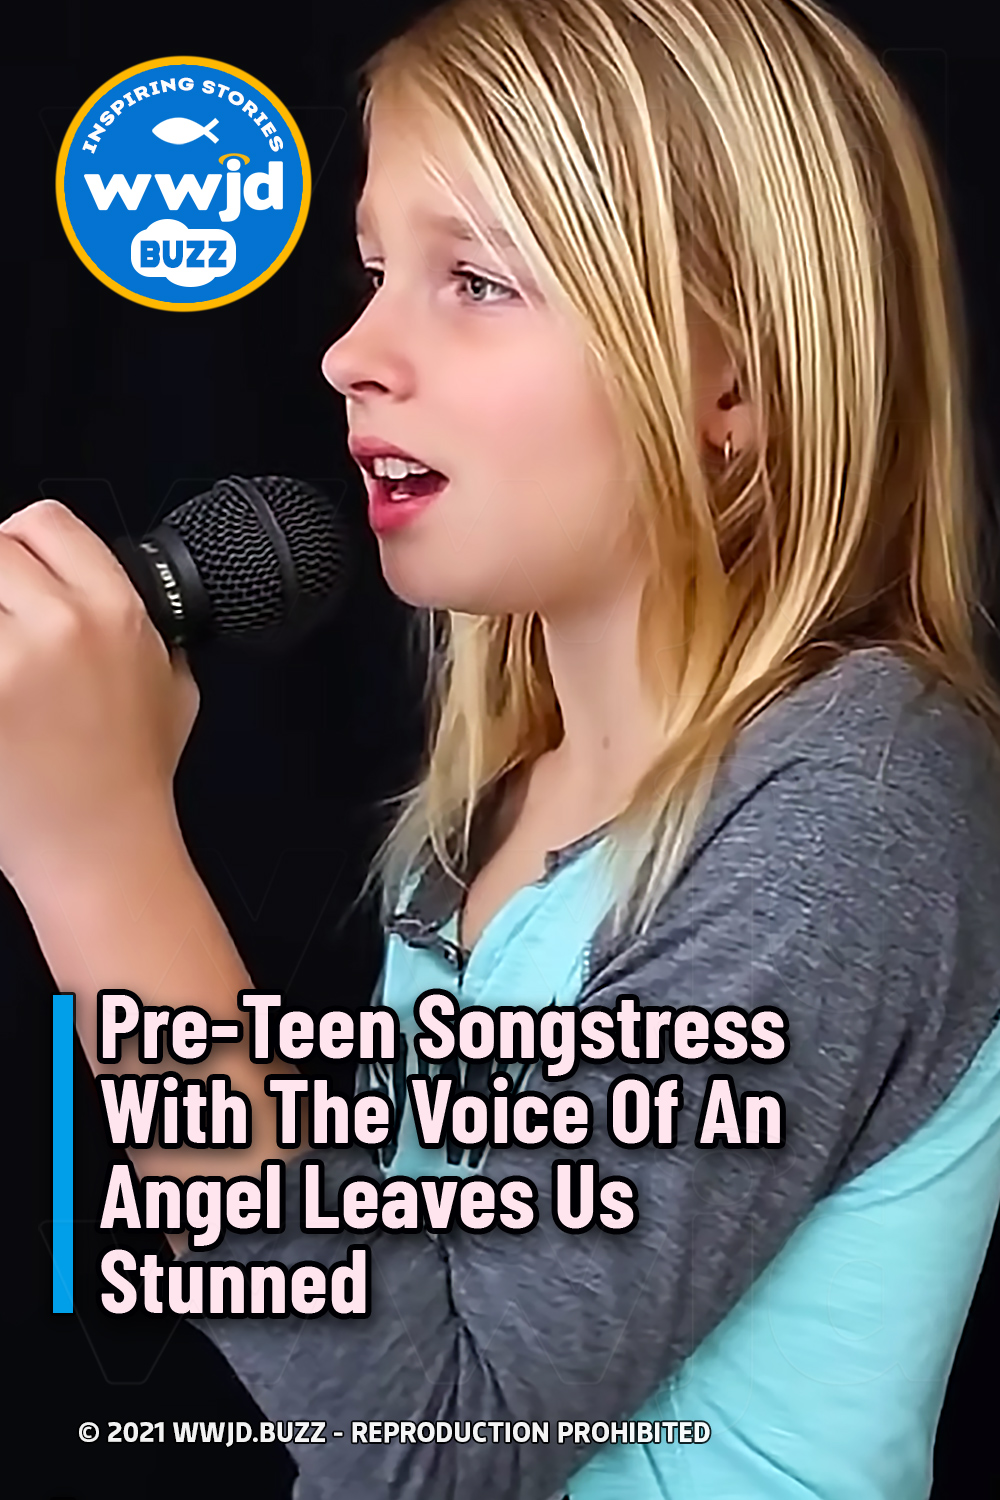 Pre-Teen Songstress With The Voice Of An Angel Leaves Us Stunned